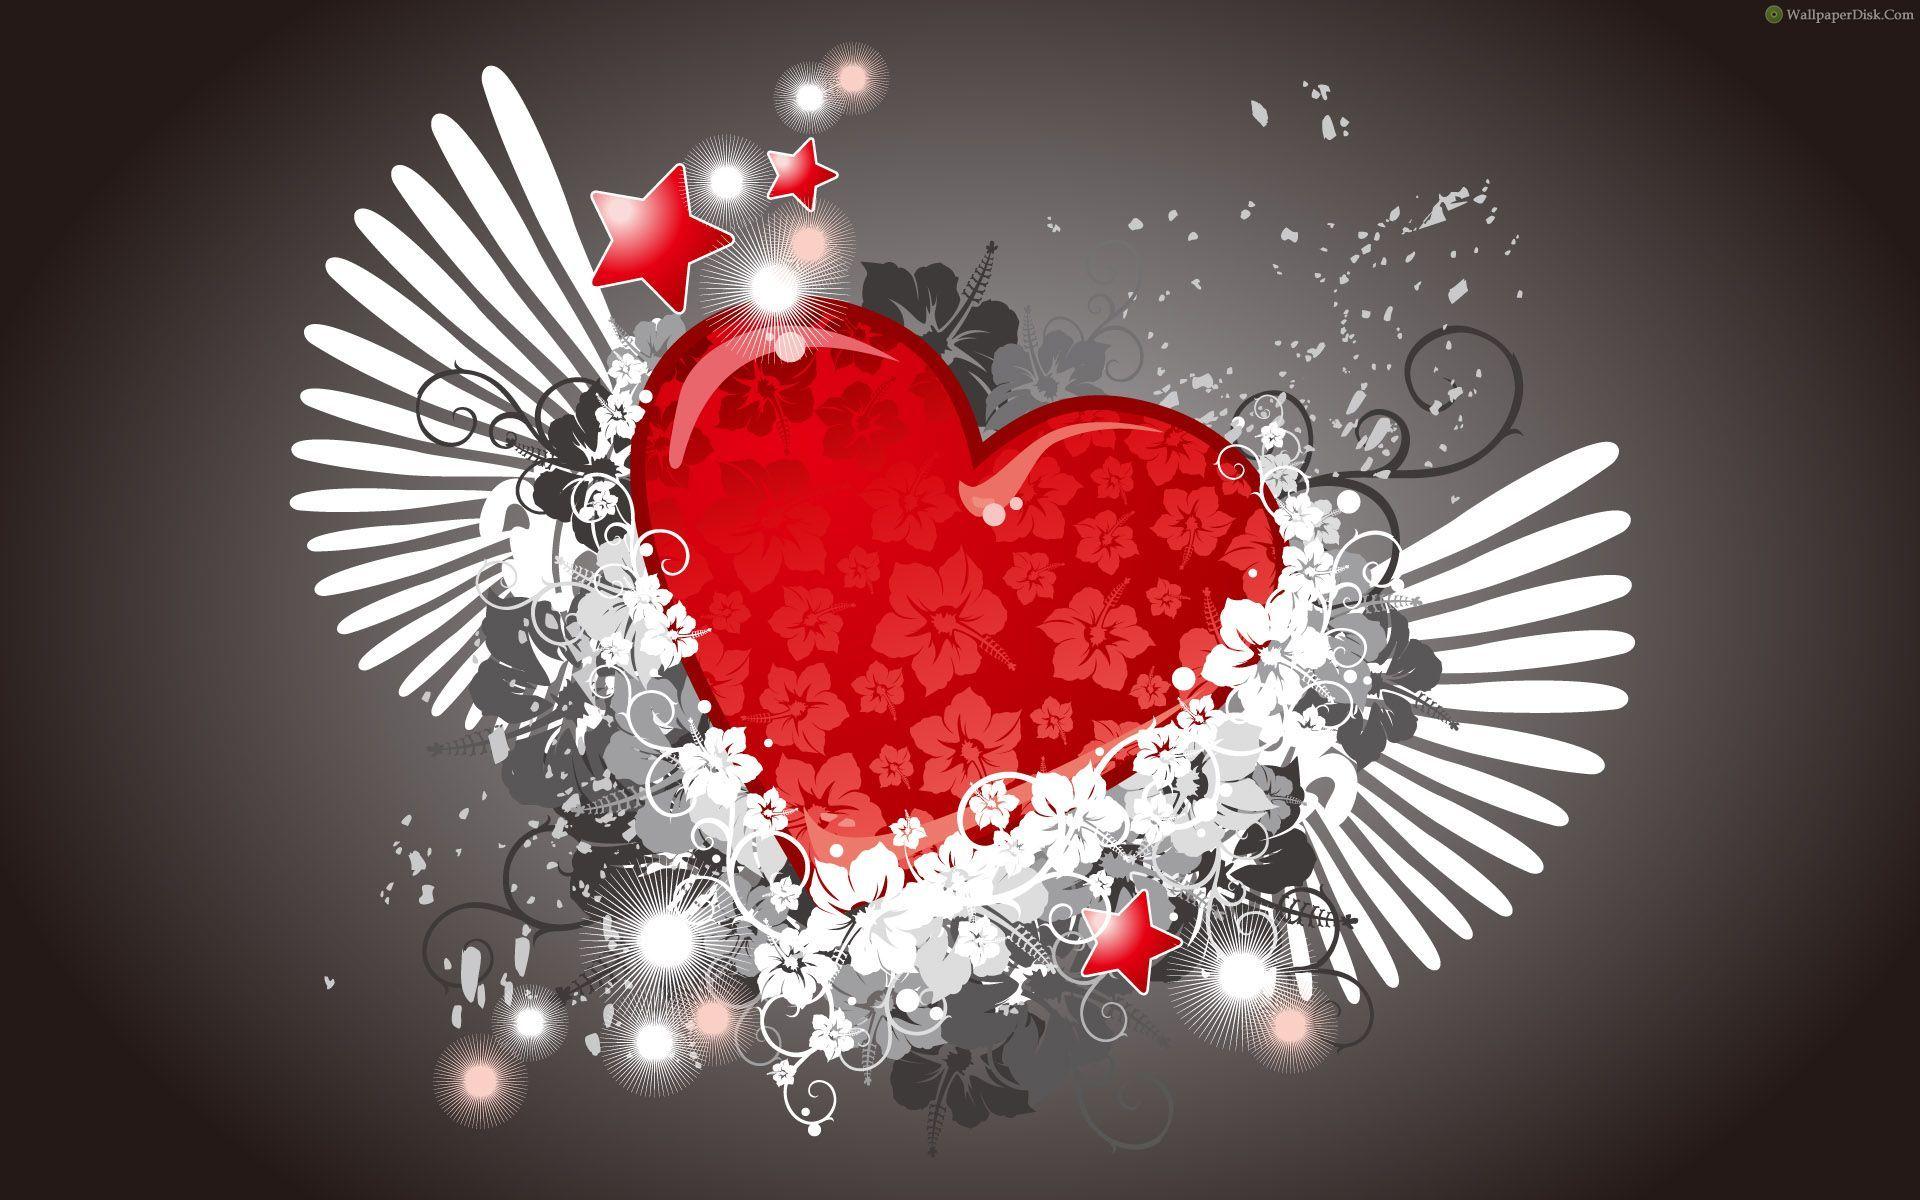 Cool Hearts With Wings. Heart wallpaper, Love